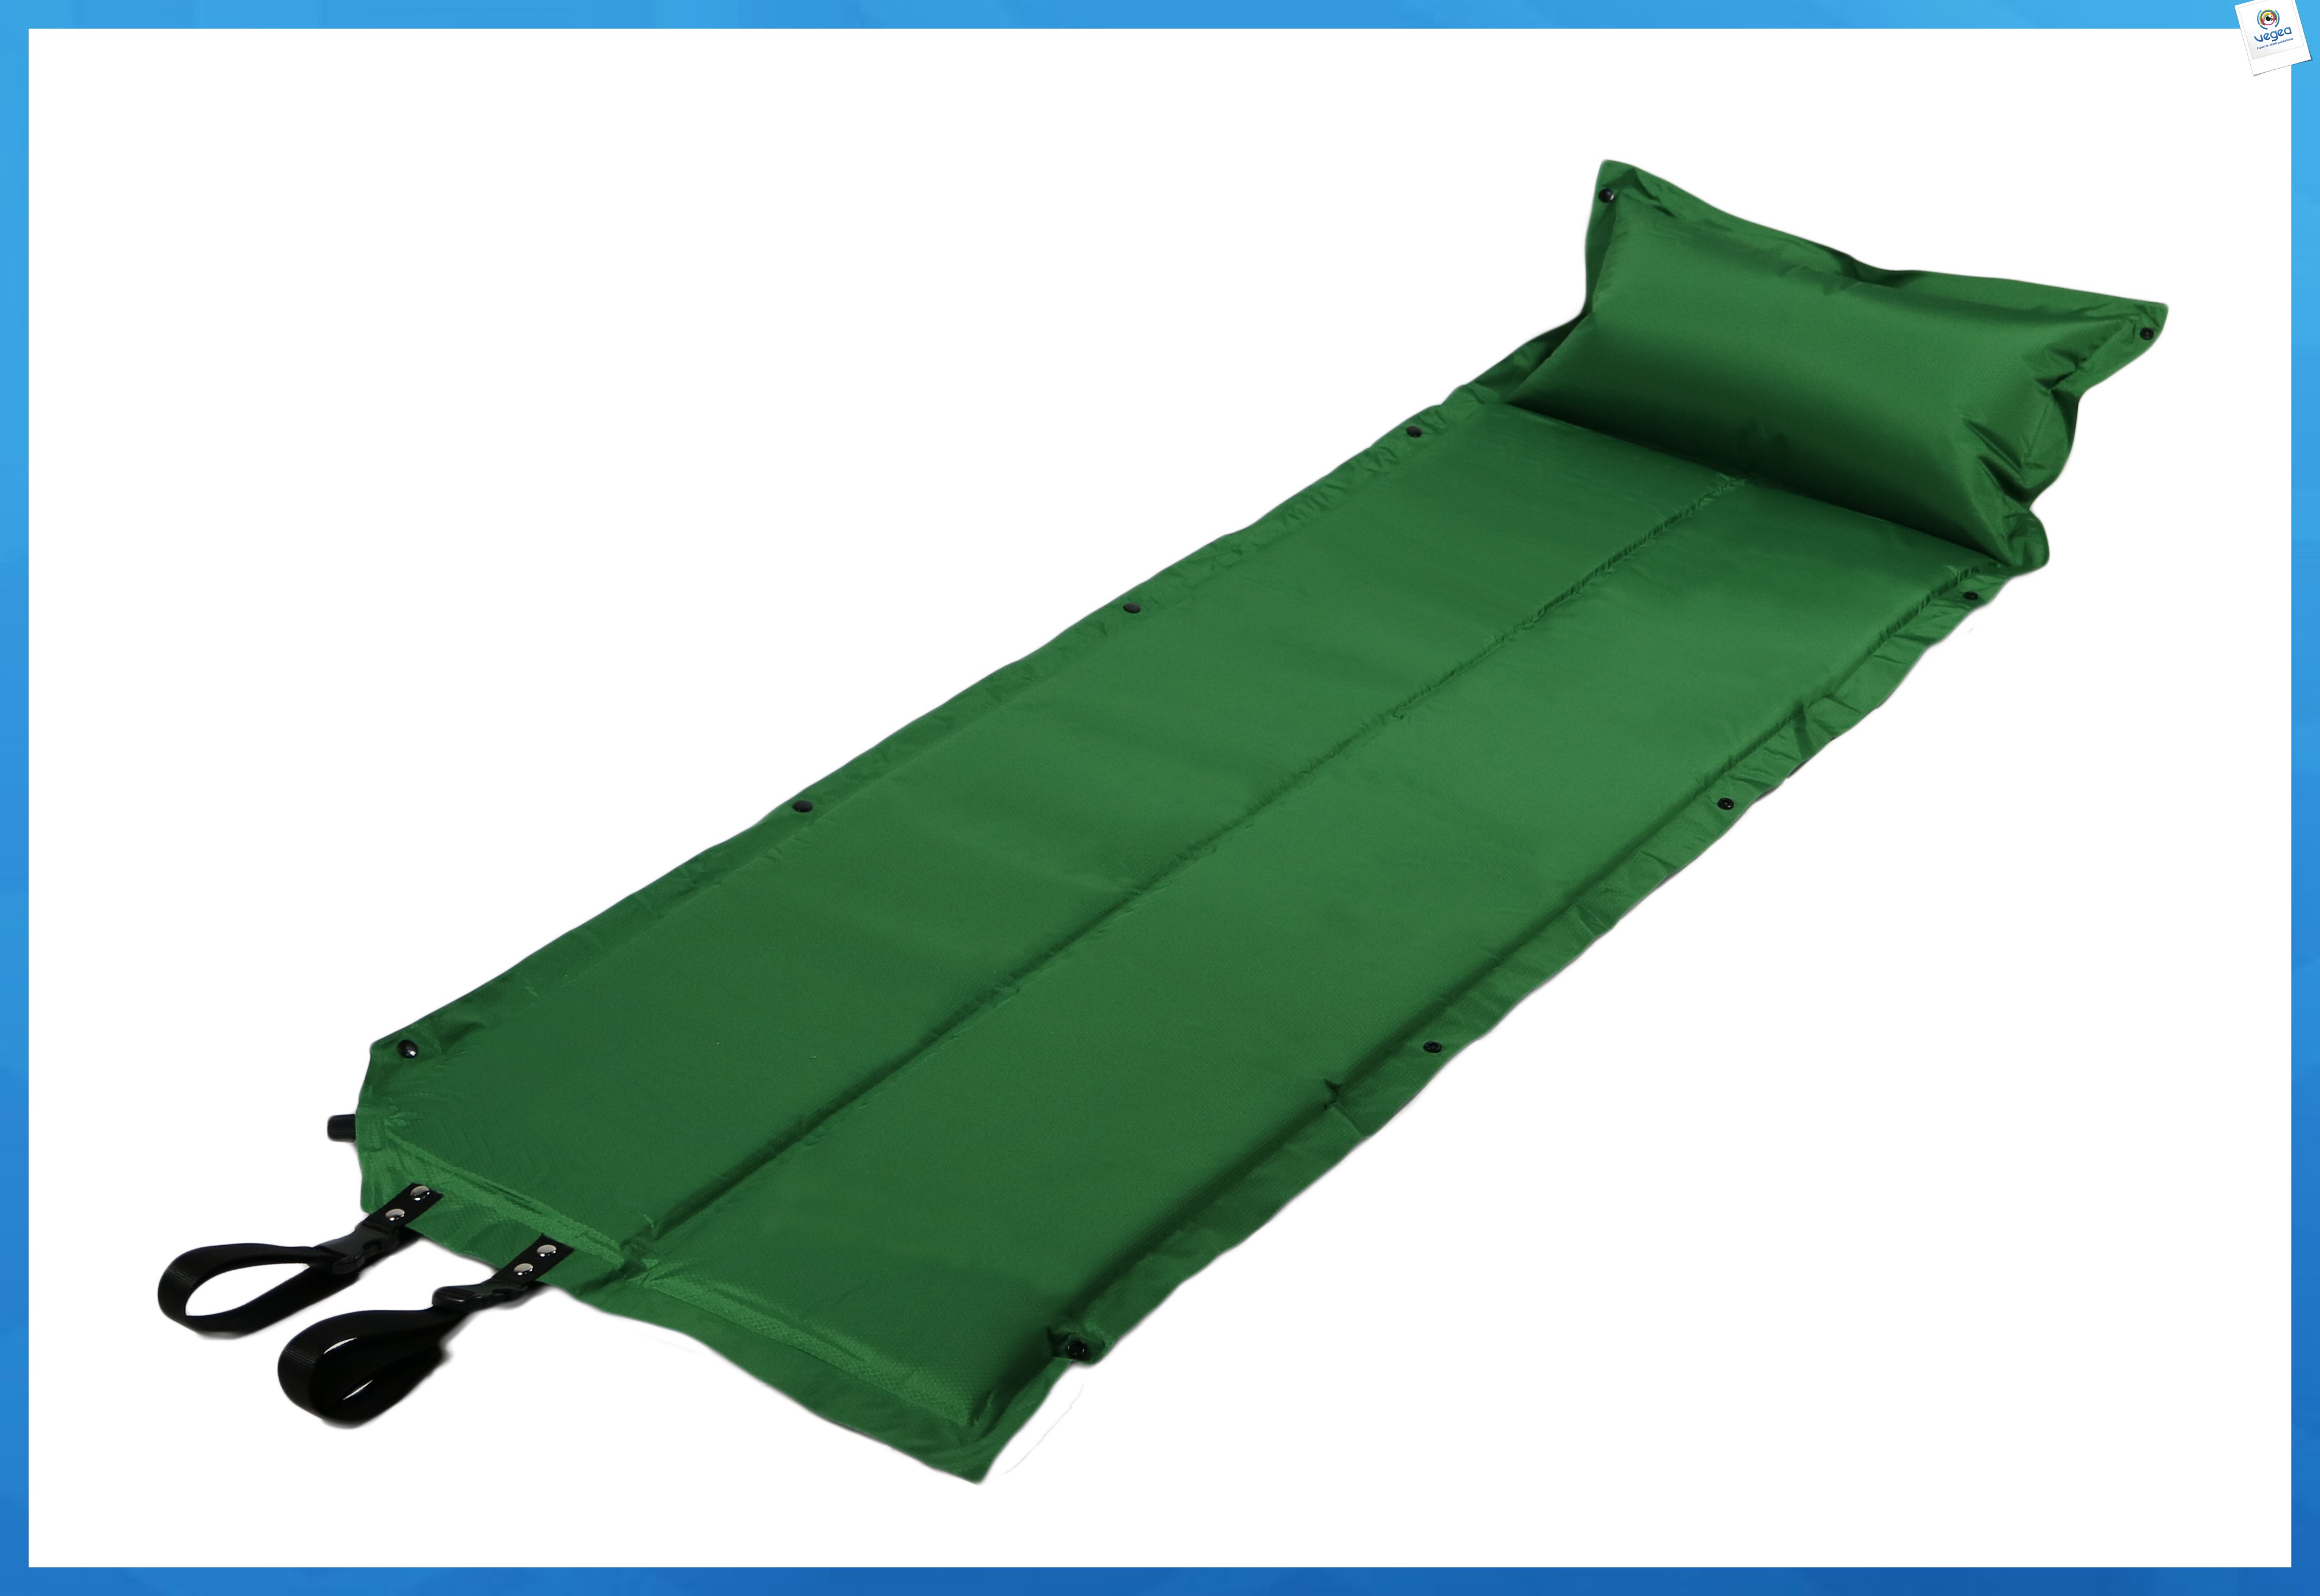 review of self inflating mattresses